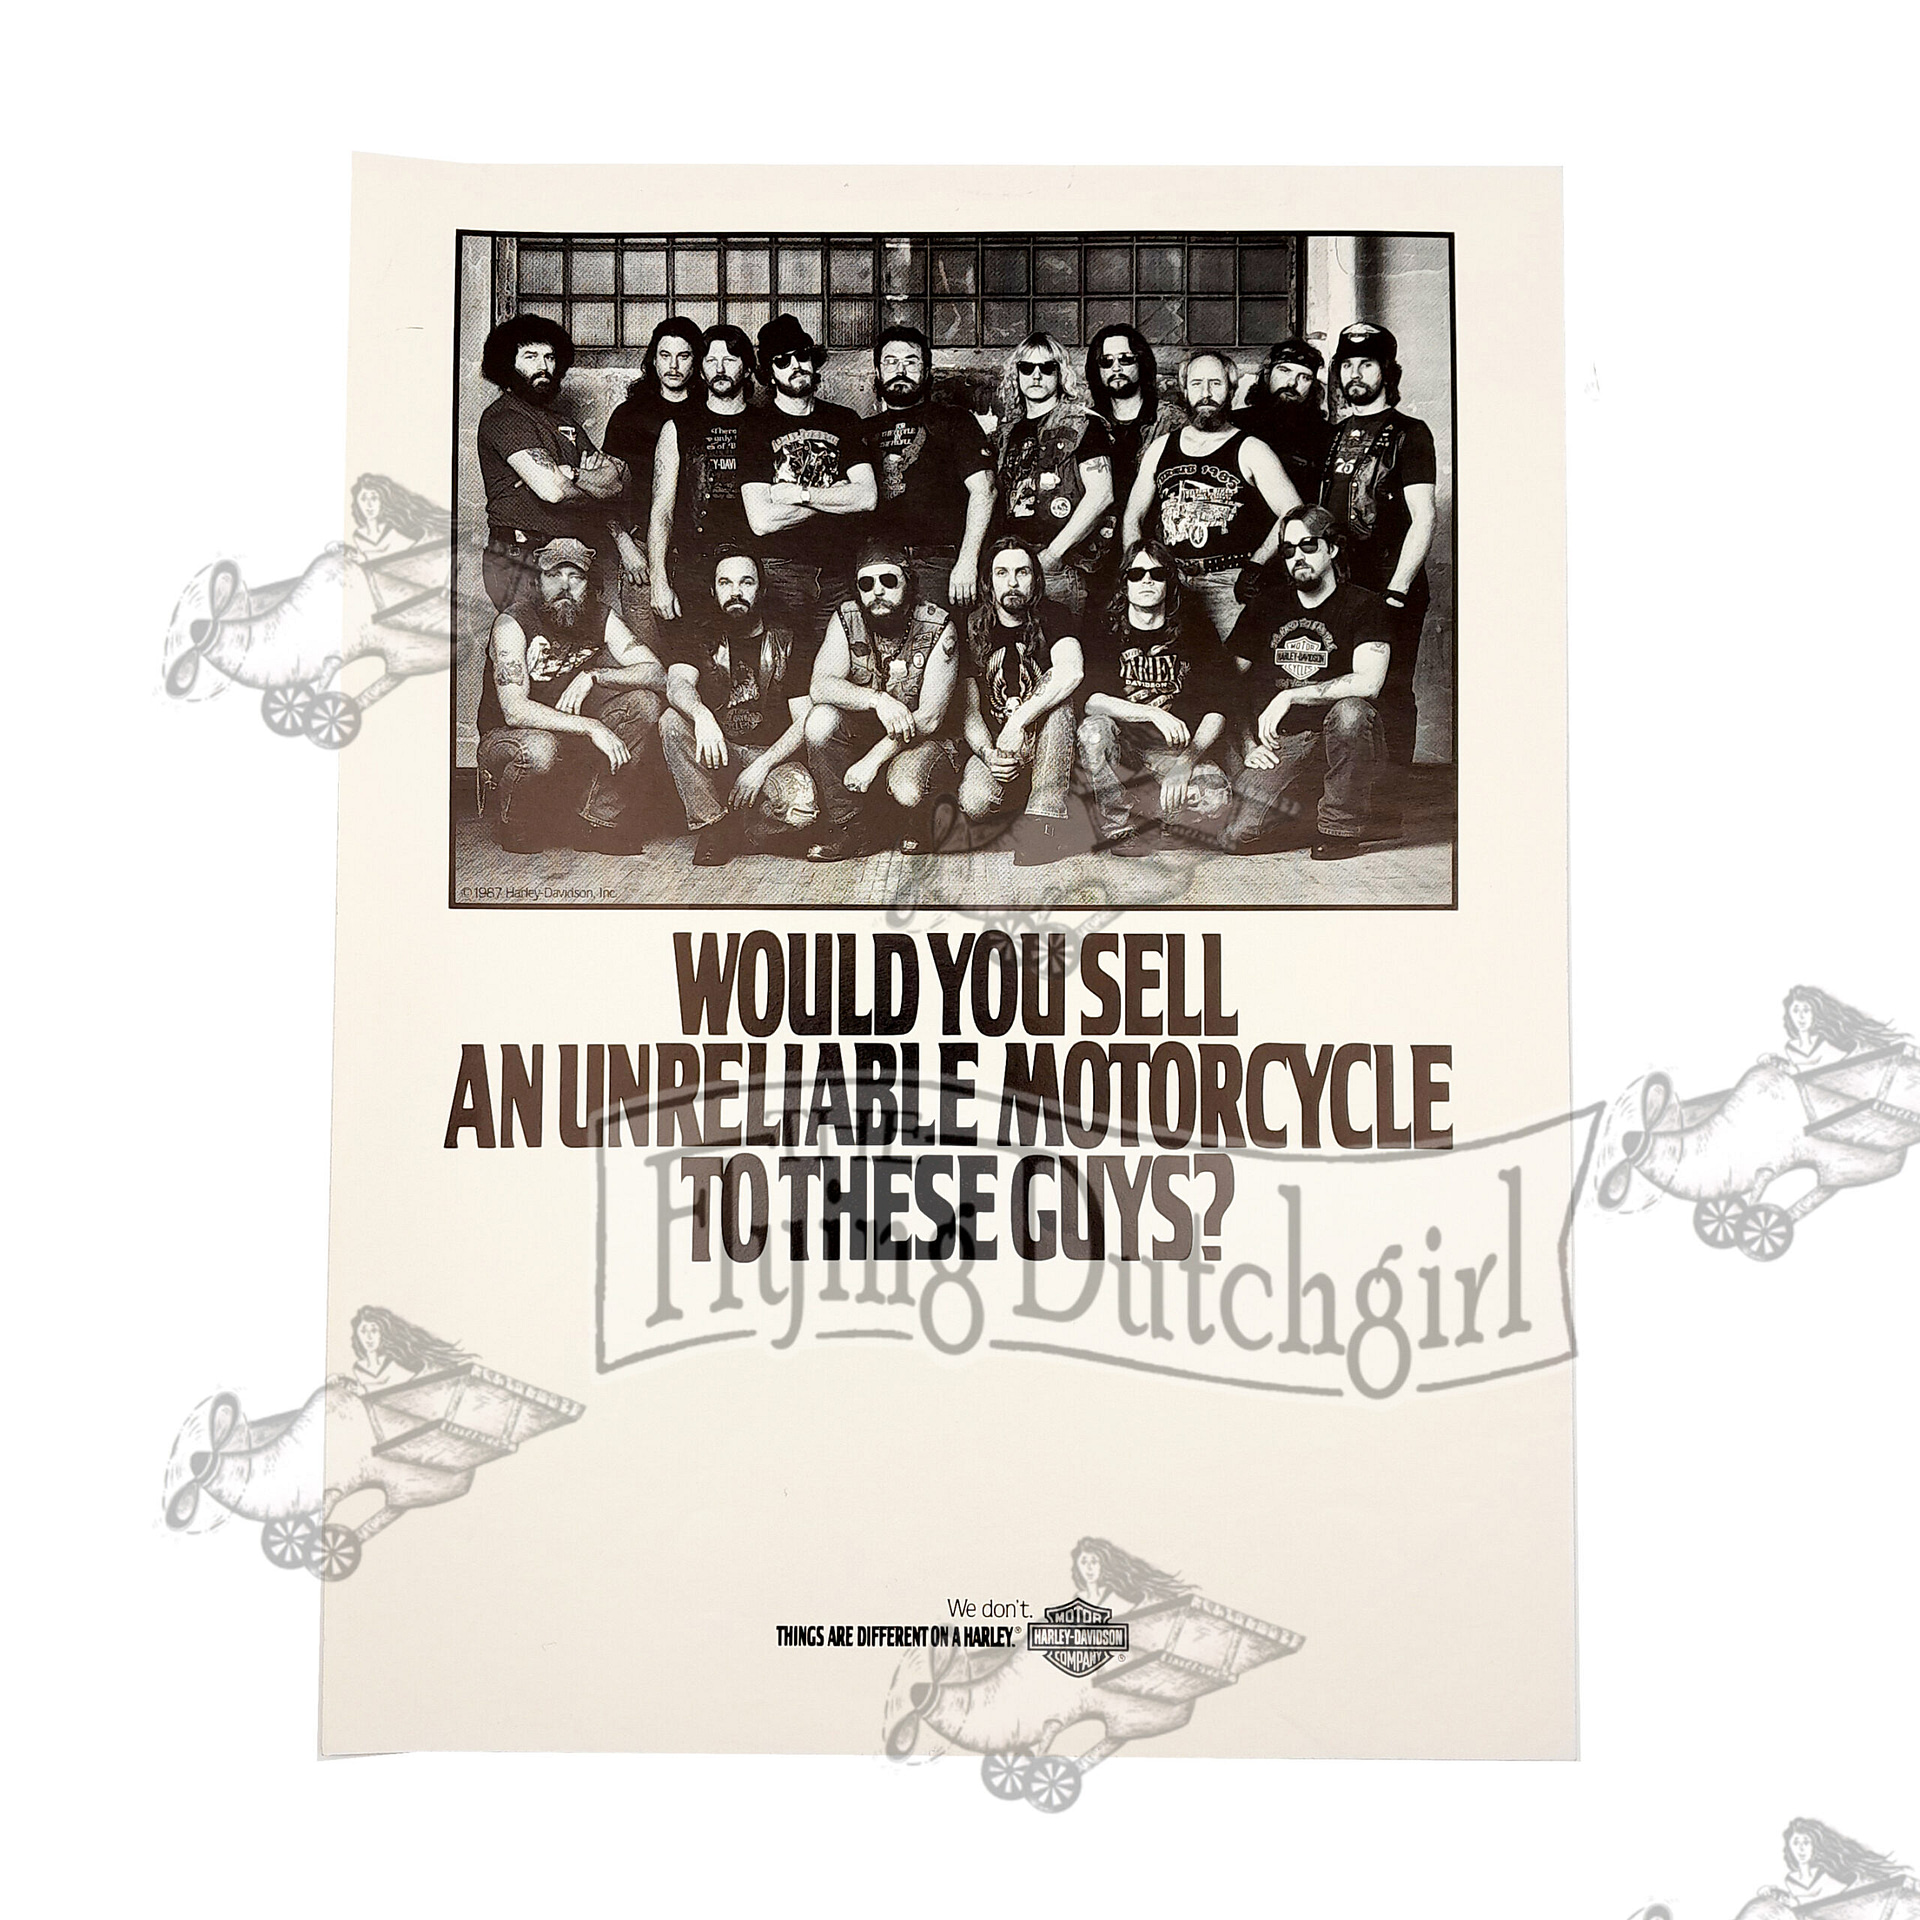 Original 1987 Harley-Davidson “WOULD YOU SELL… TO THESE GUYS” Counter Flyer